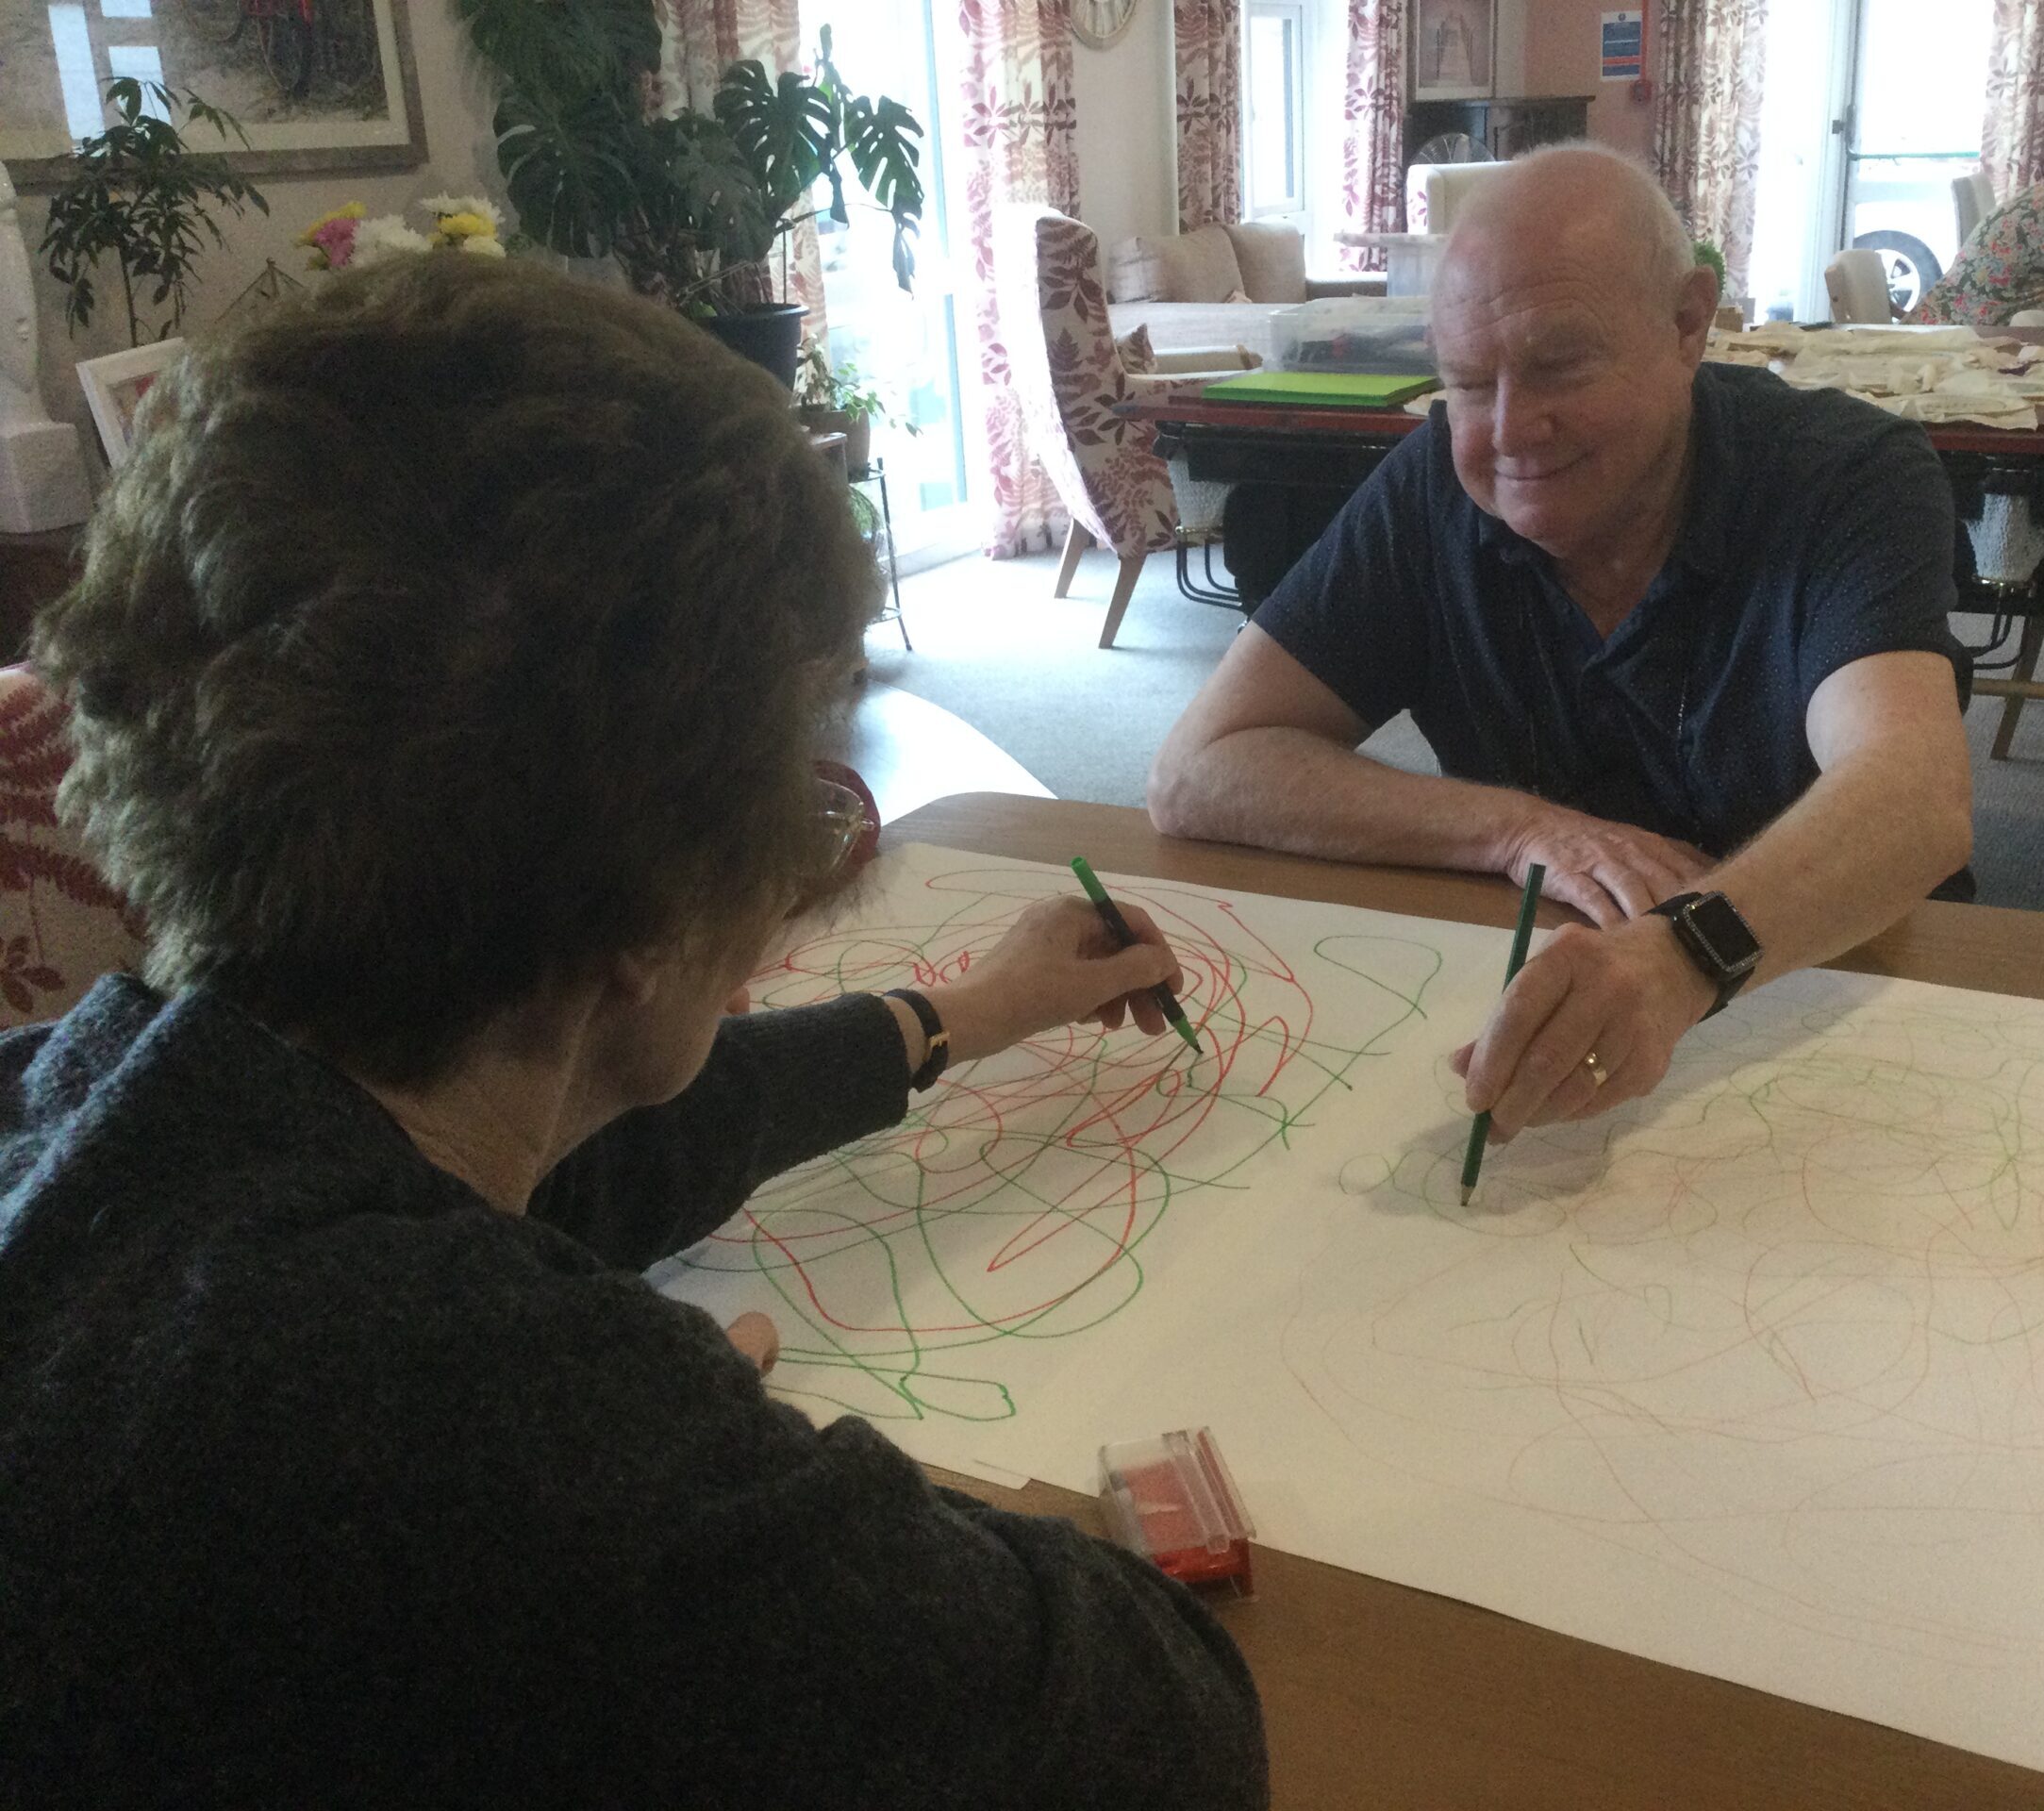 A gentleman smiles as he draws on a large piece of paper, seated opposite a woman, also drawing random lines